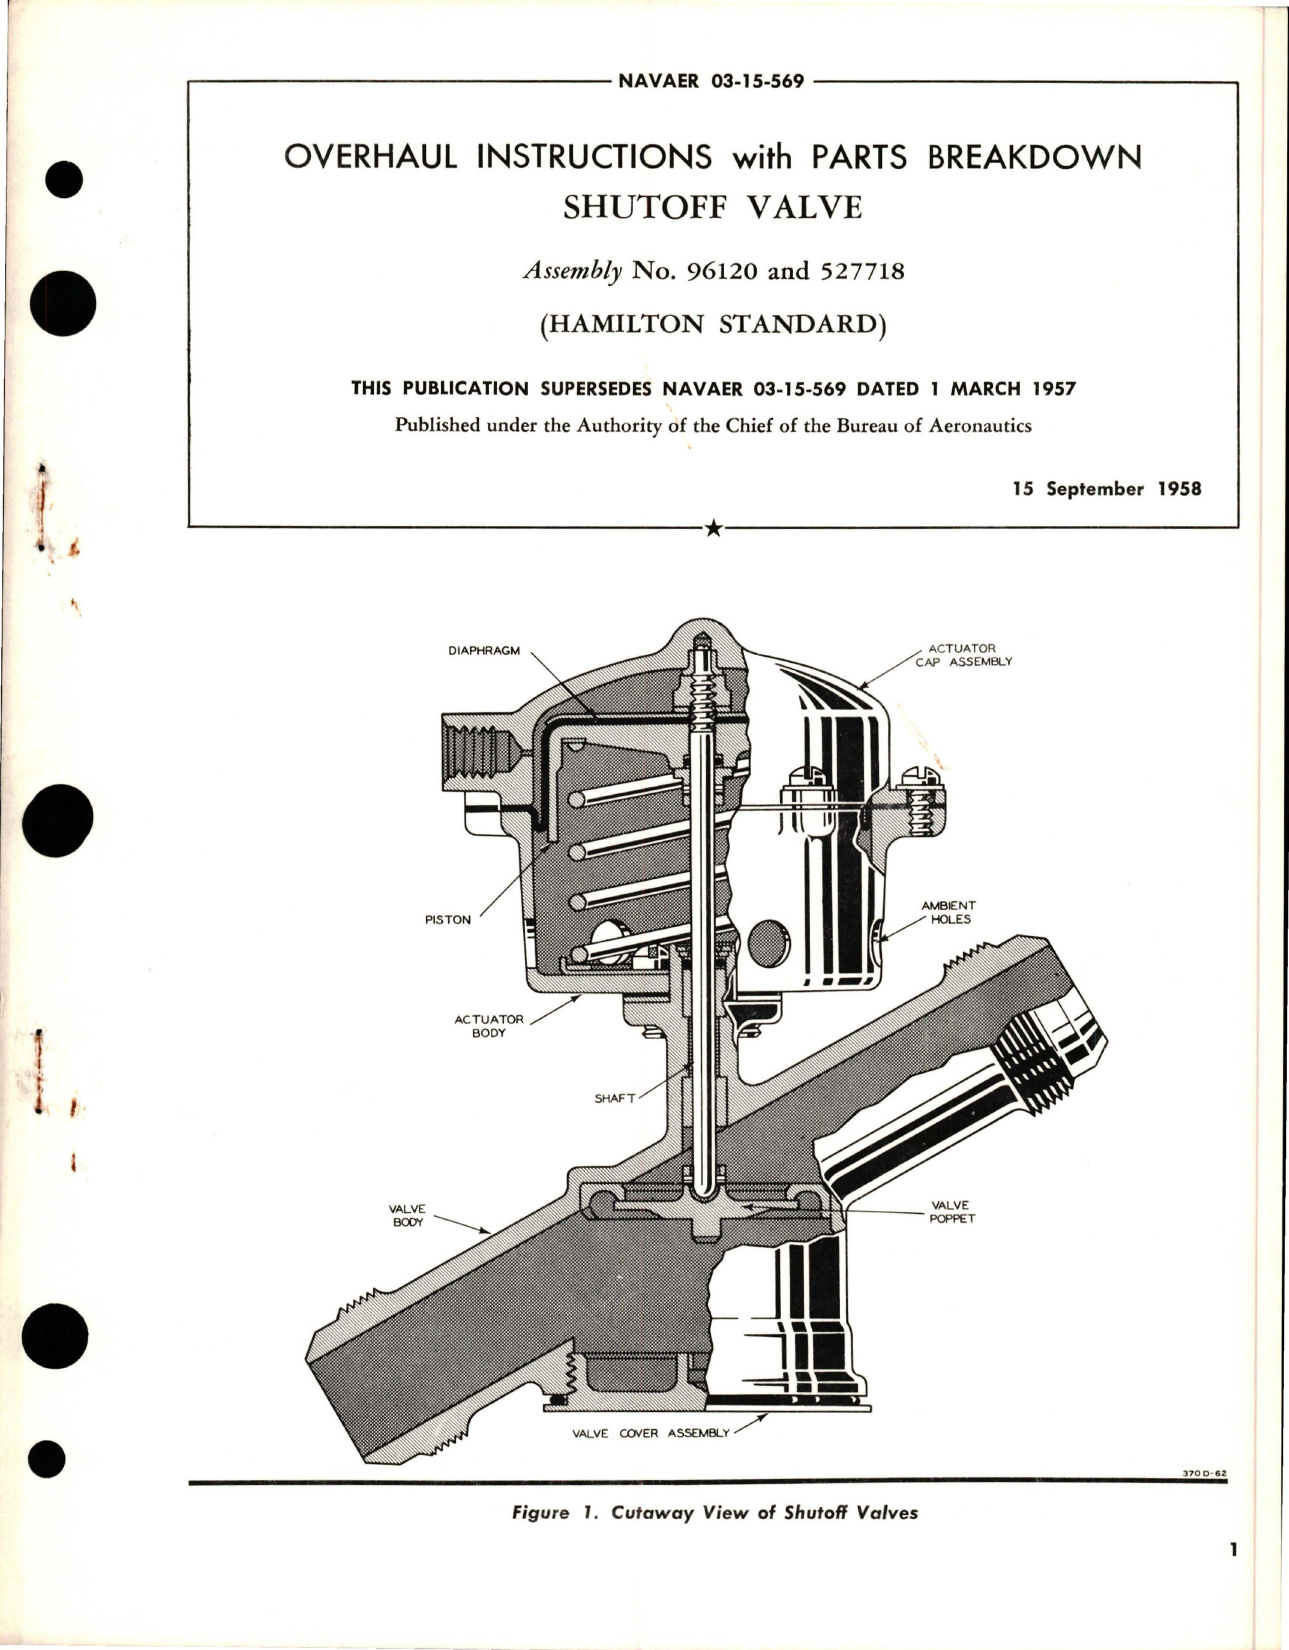 Sample page 1 from AirCorps Library document: Overhaul Instructions with Parts Breakdown for Shutoff Valve - Assembly 96120 and 527718